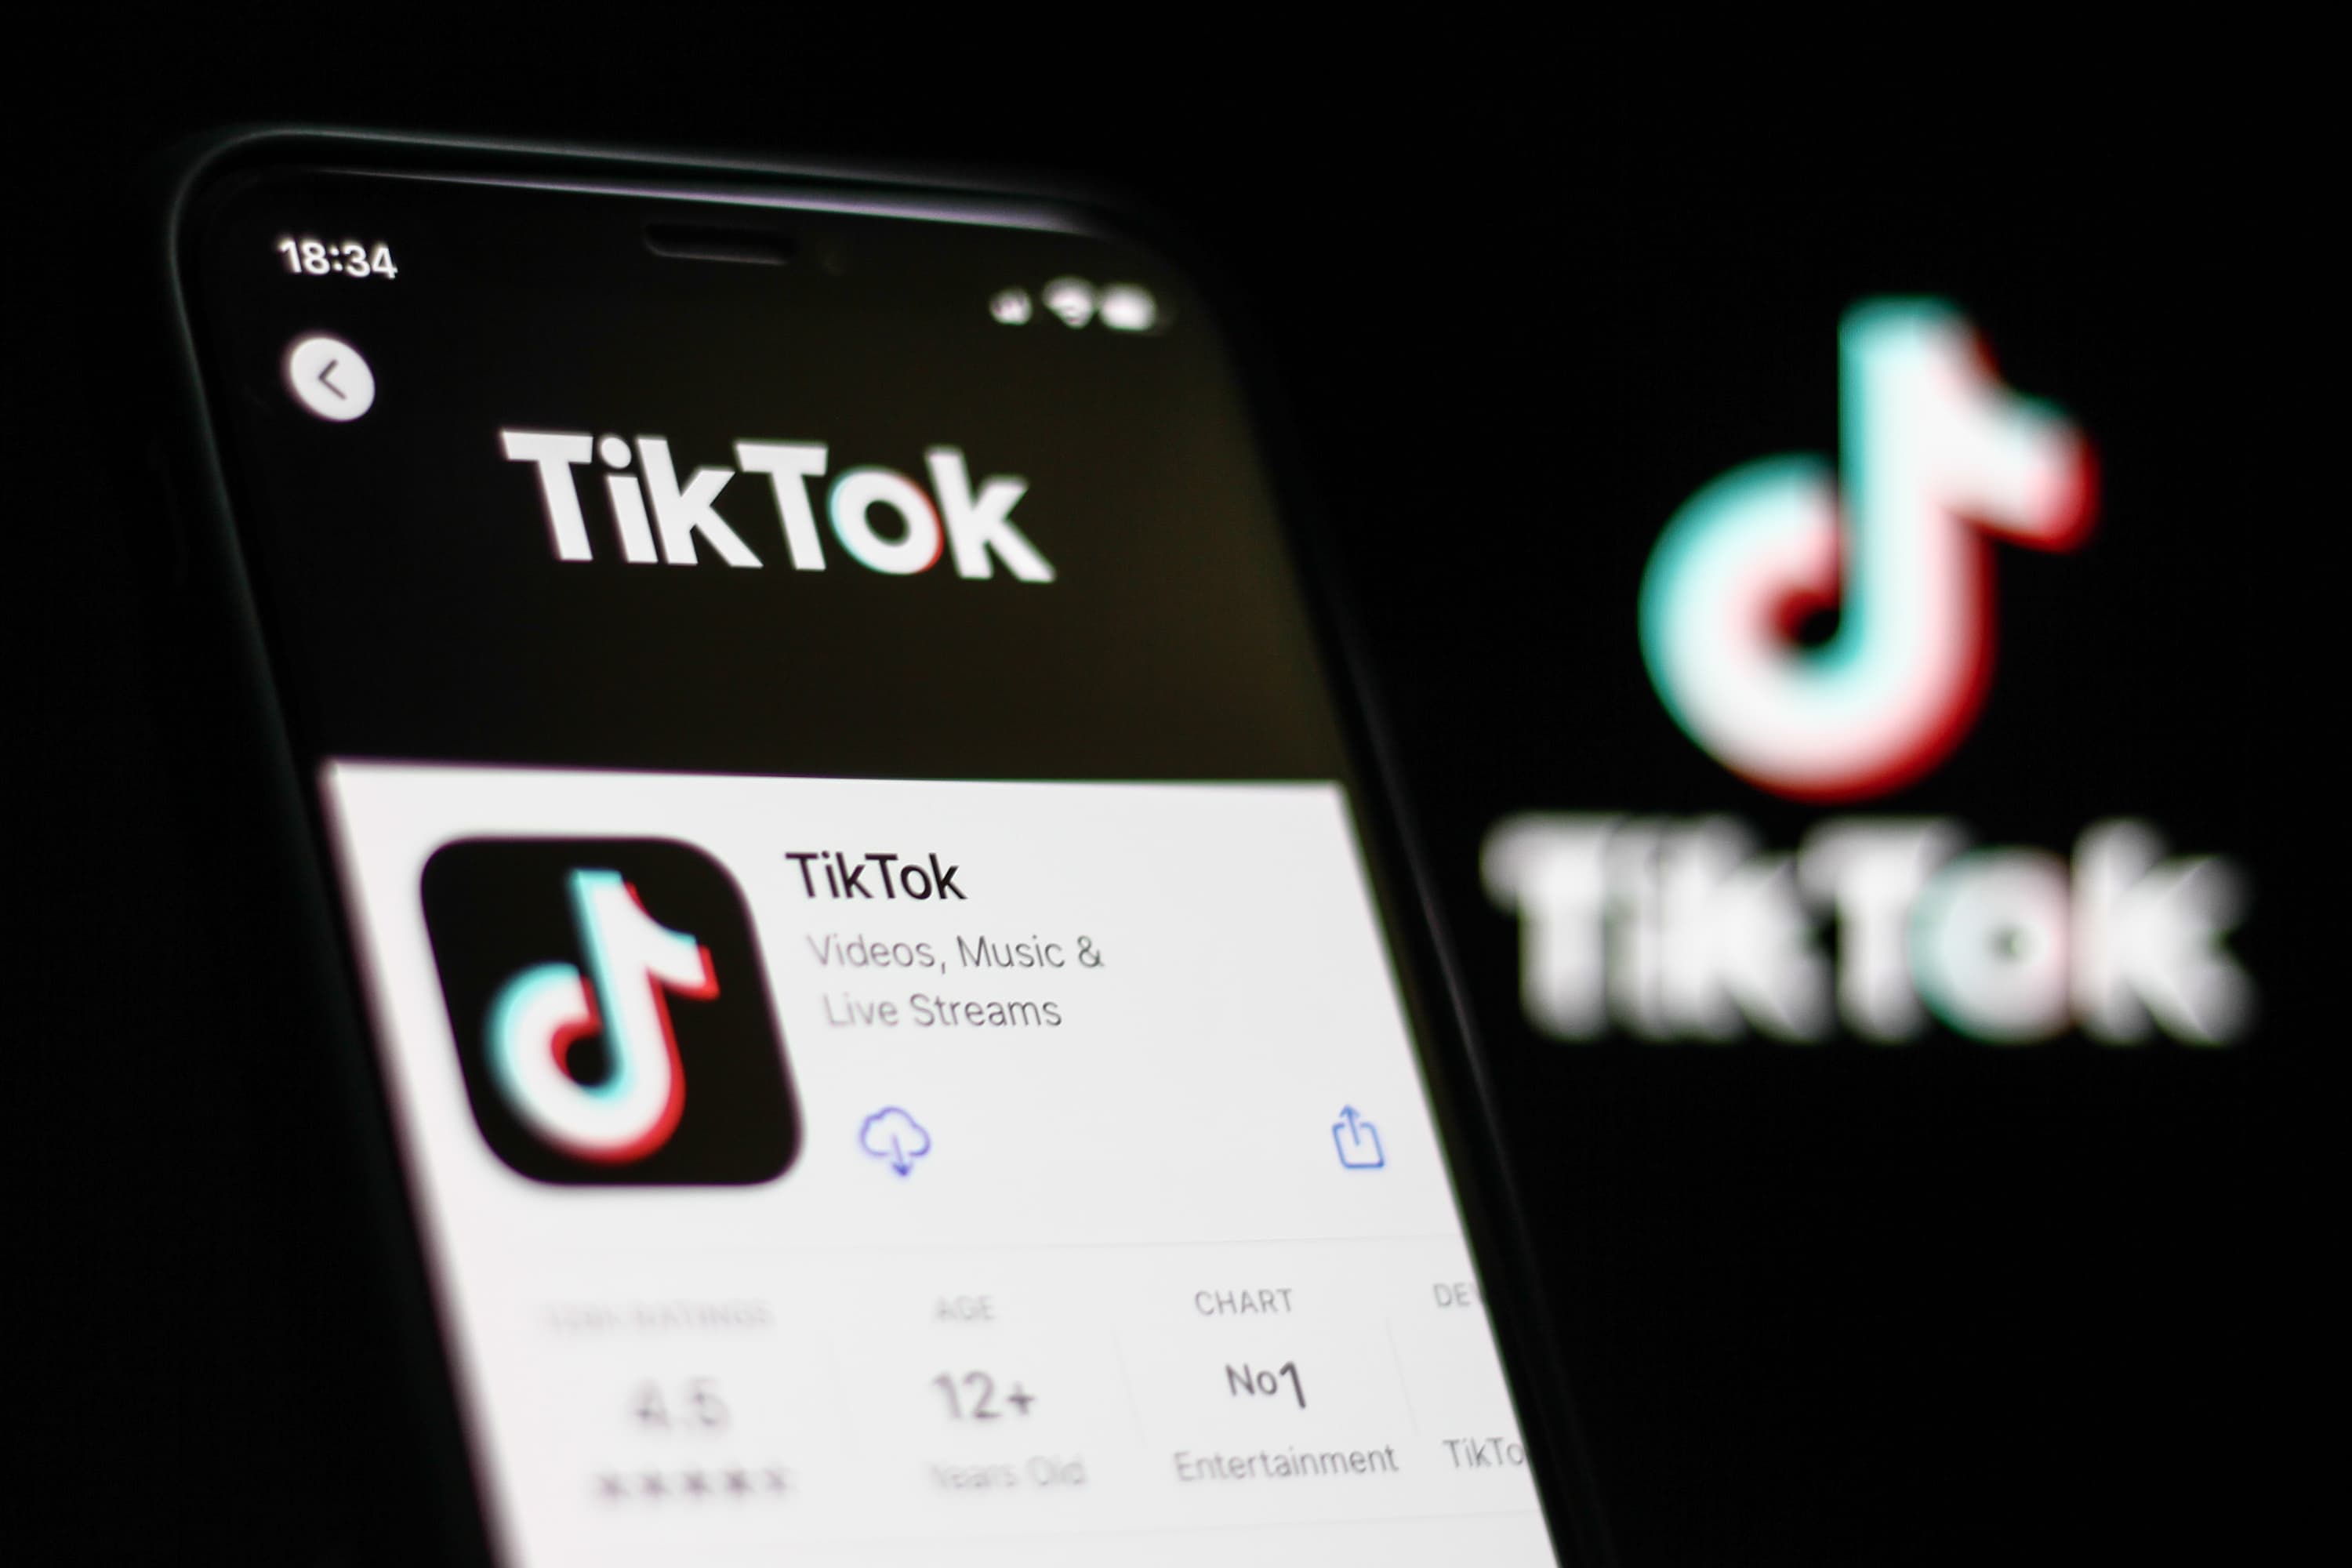 NJ Governor Bars TikTok, Other ‘High-Risk' Platforms From State
Devices